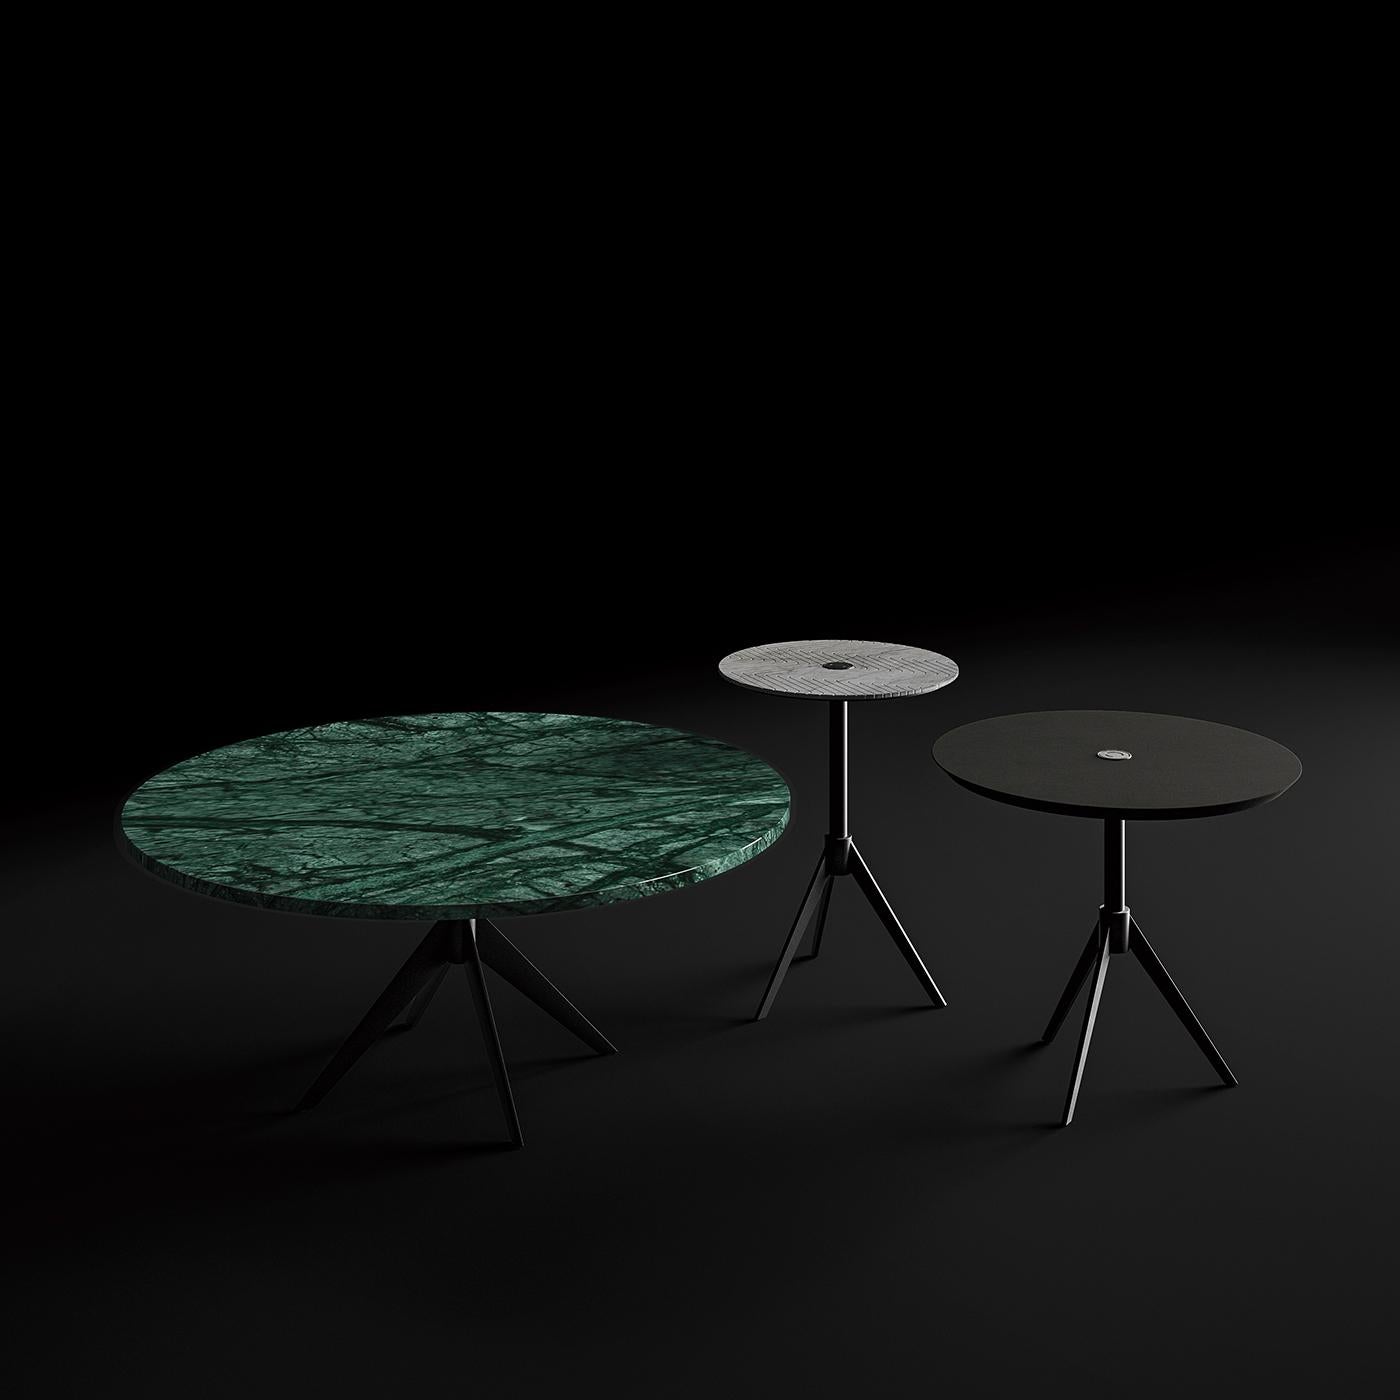 The high coffee table is characterized by an engraved design on the marble top and a chic, clean style that makes it the perfect addition to any contemporary style decor. The metal base is formed by a central pole that joins on to three legs that